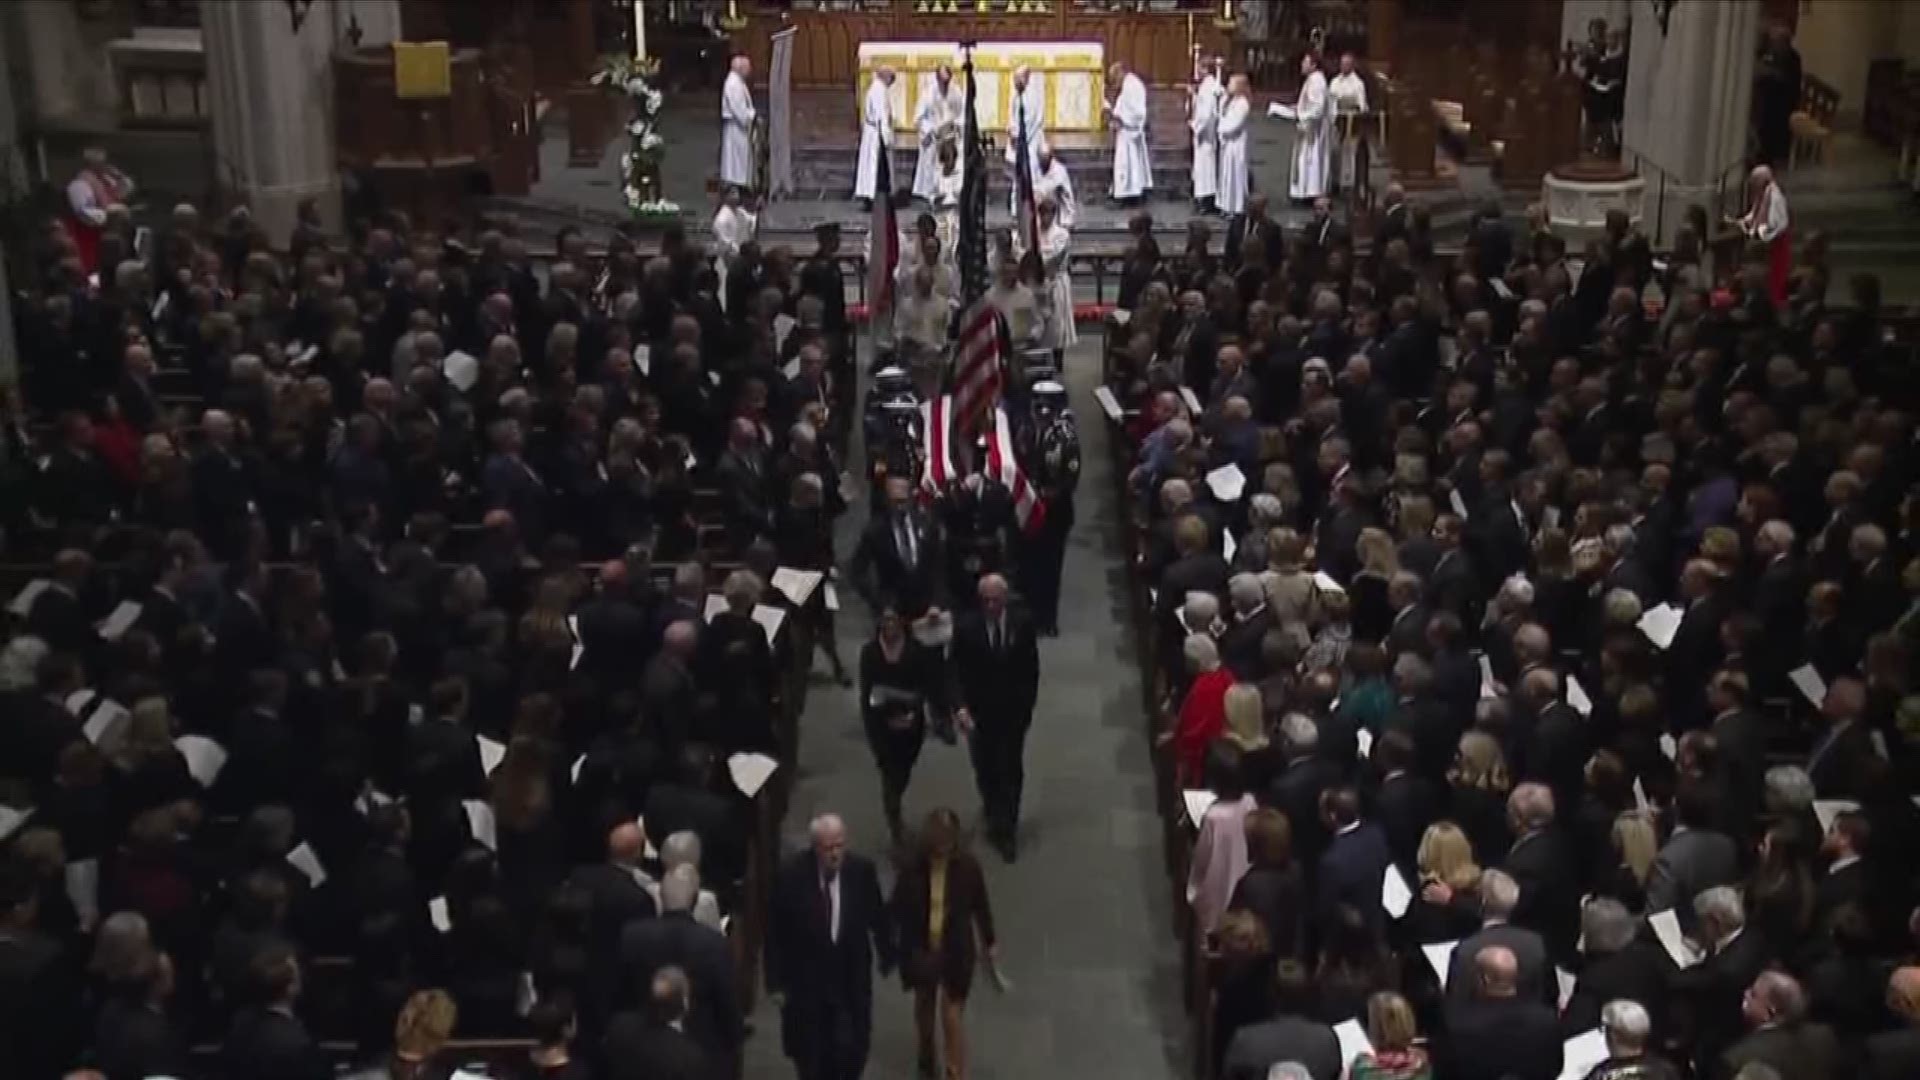 Following funeral ceremonies, George H.W. Bush's casket is brought out of St. Martin's Cathedral in Houston, TX